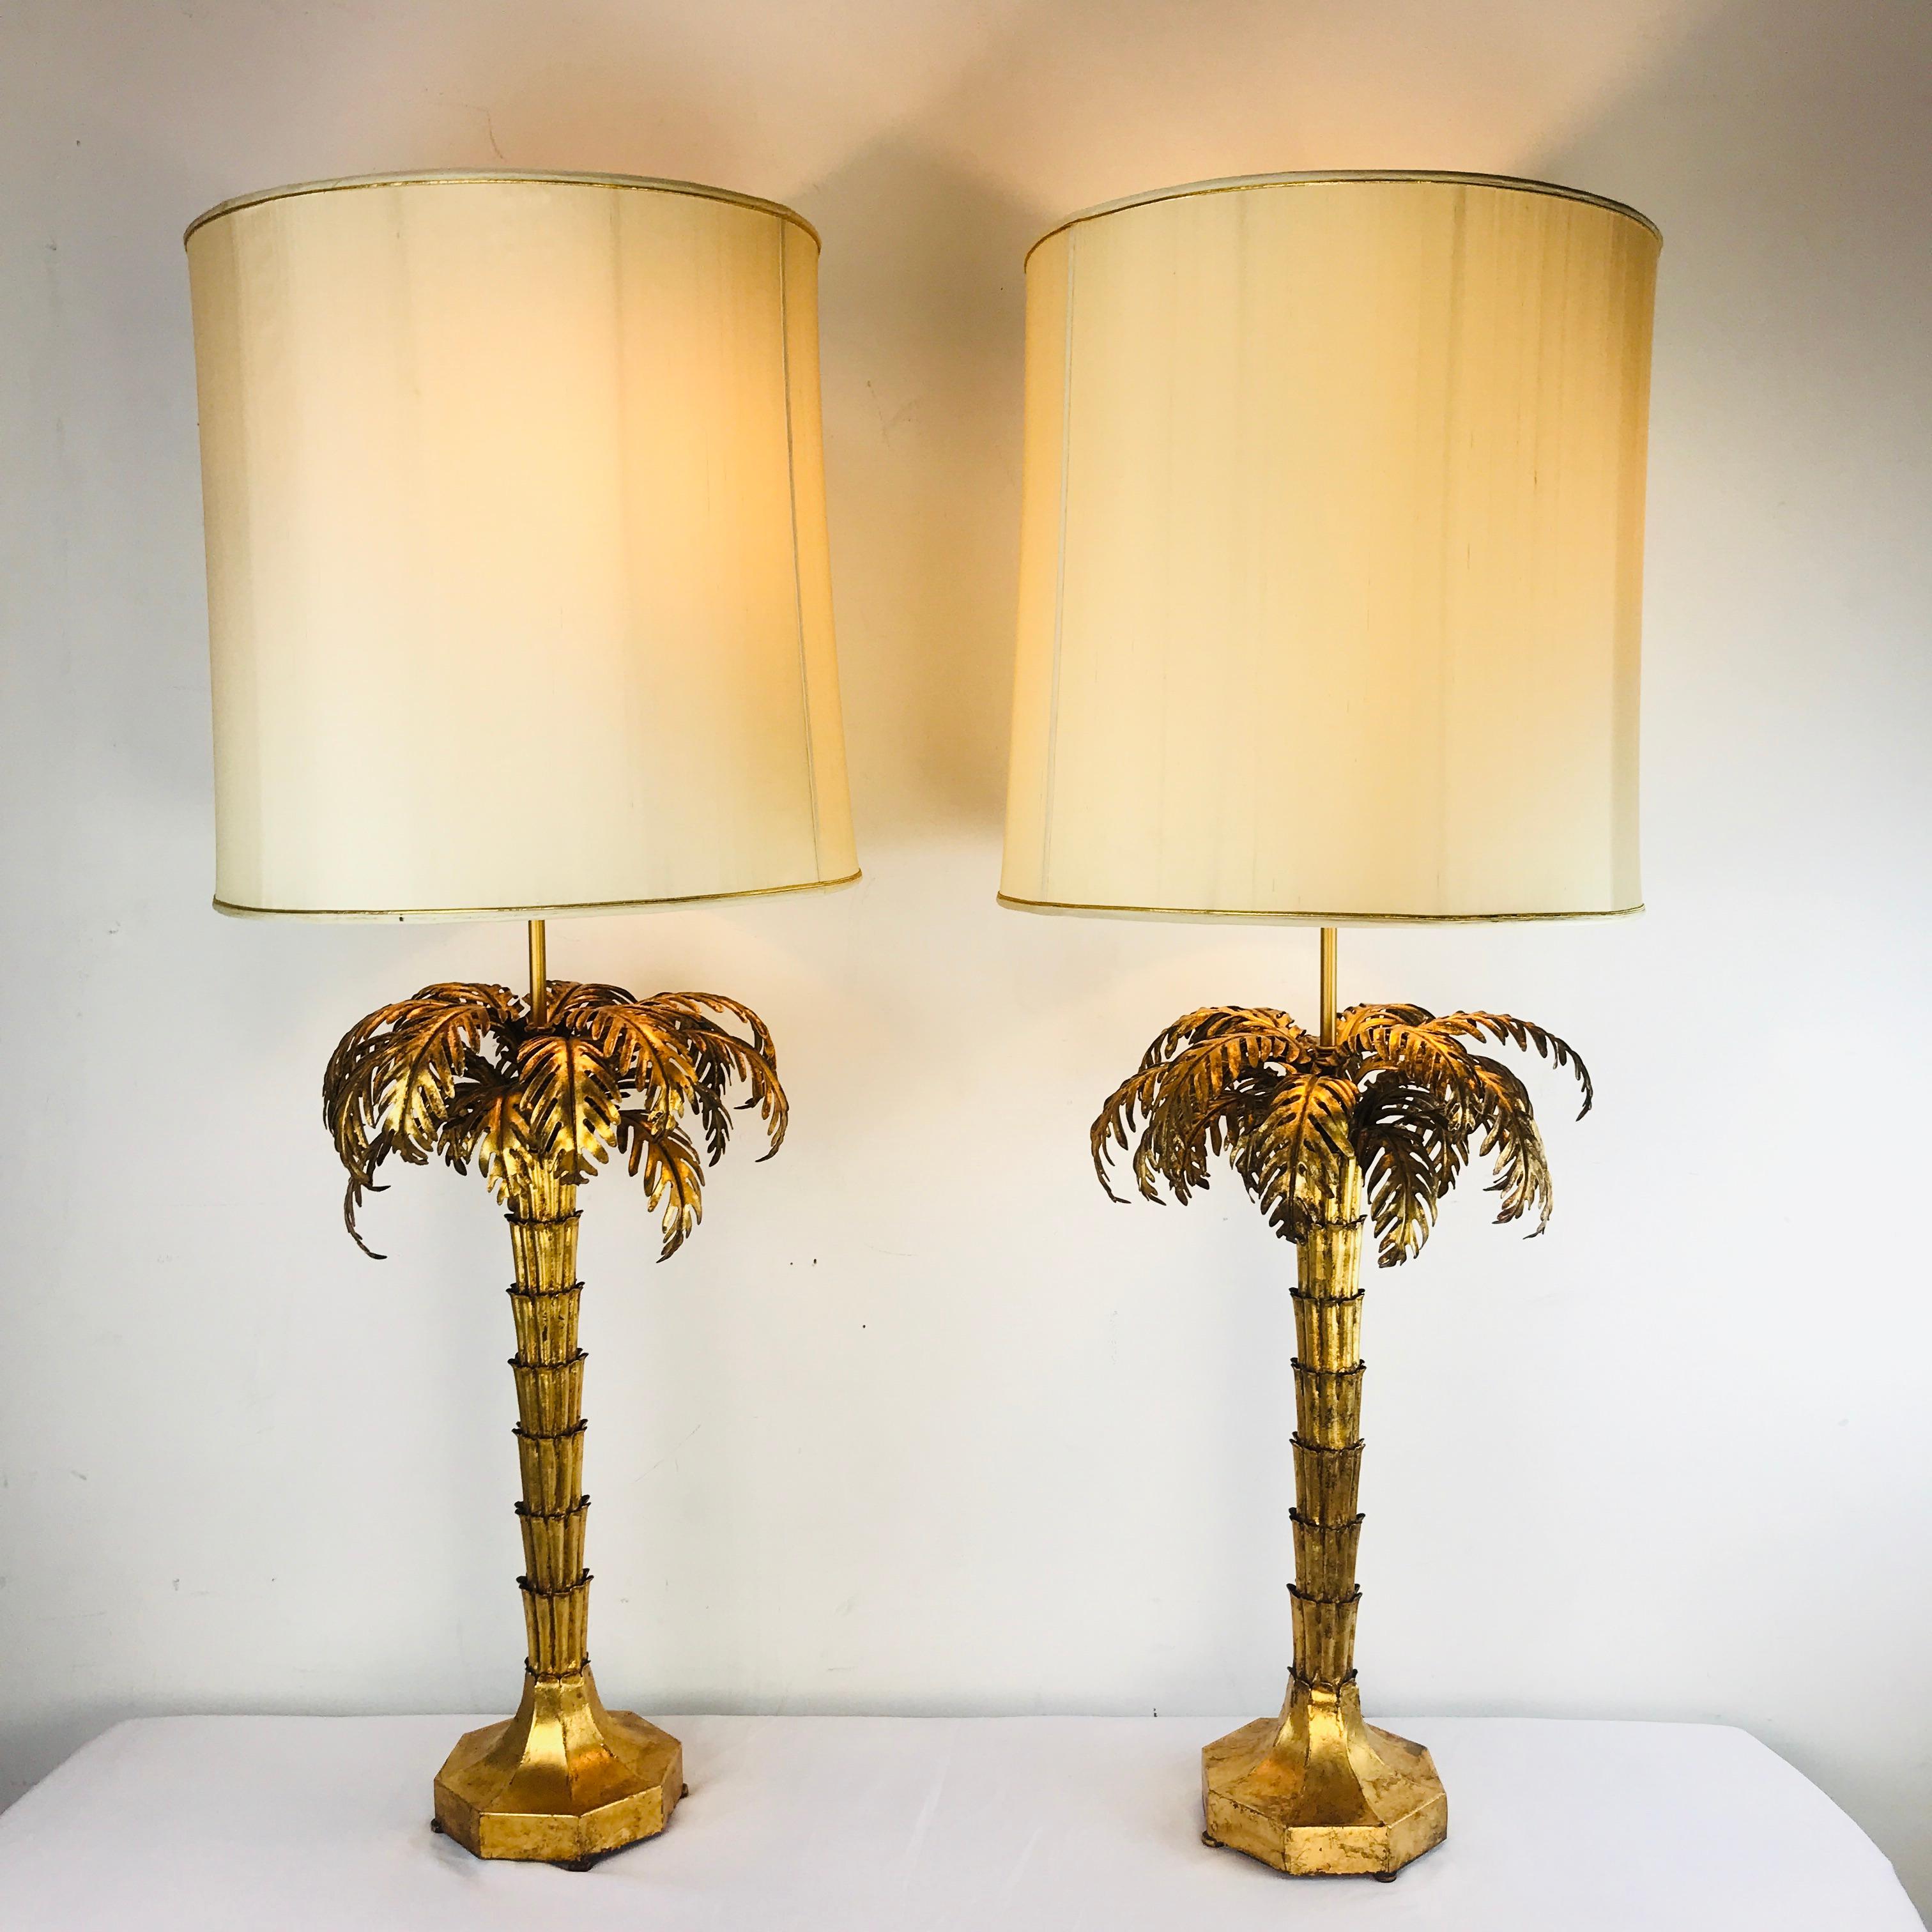 Exceptional Pair of Gold Gilded Palm Tree Lamps 1